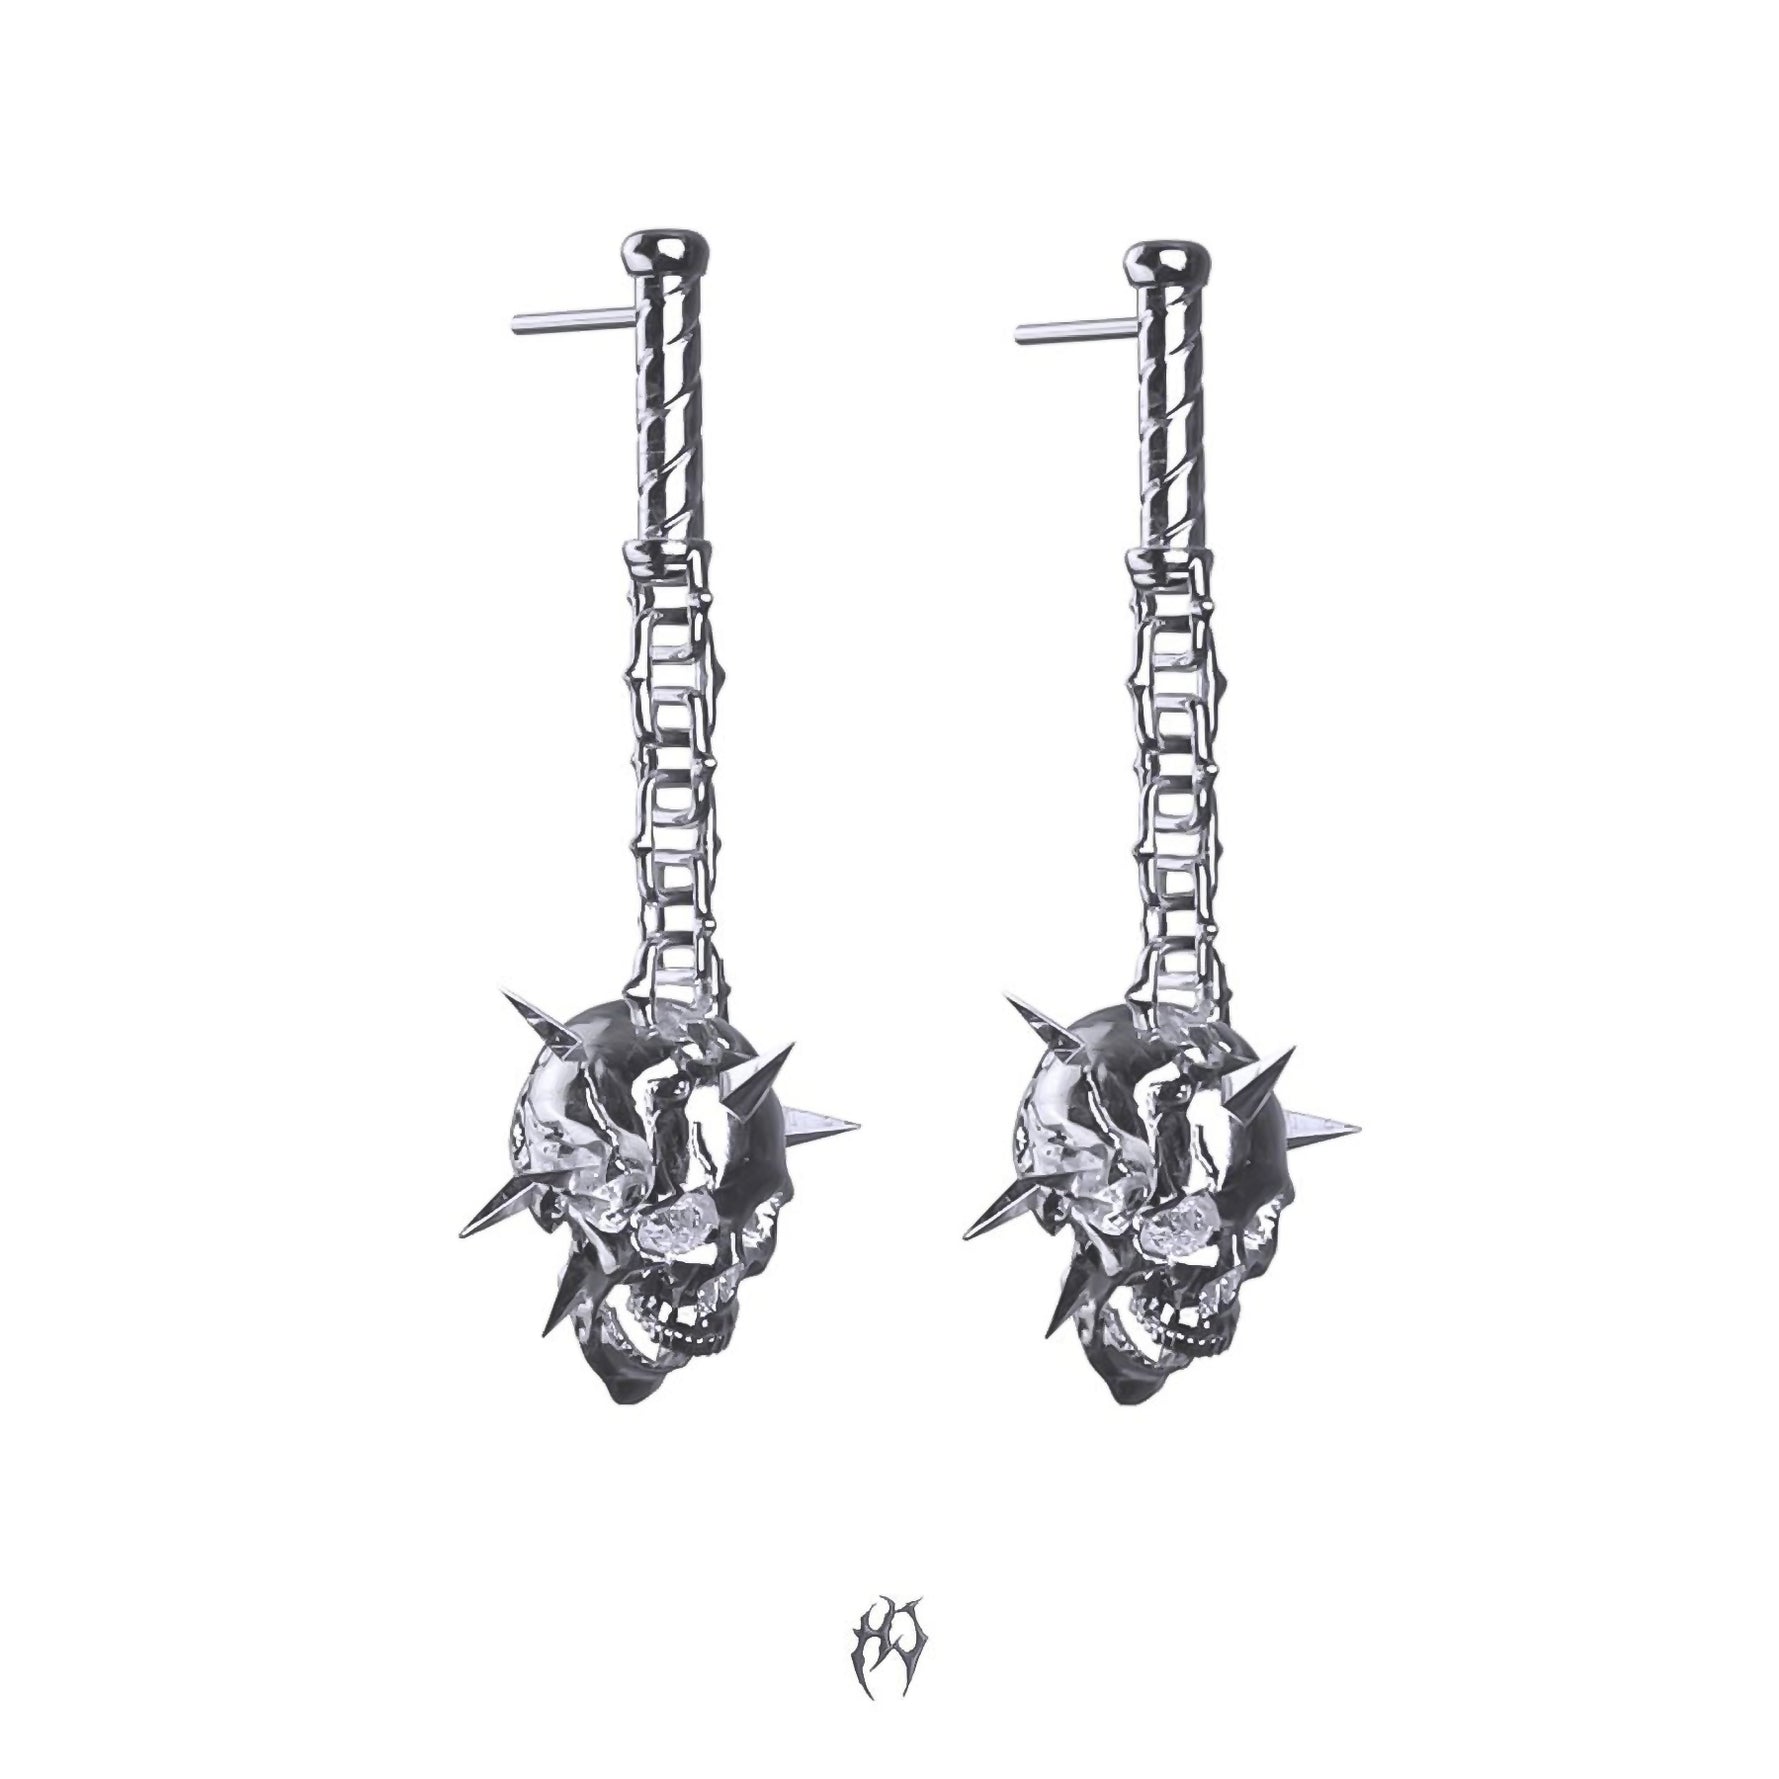 6TH CIRCLE OF HELL EARRING